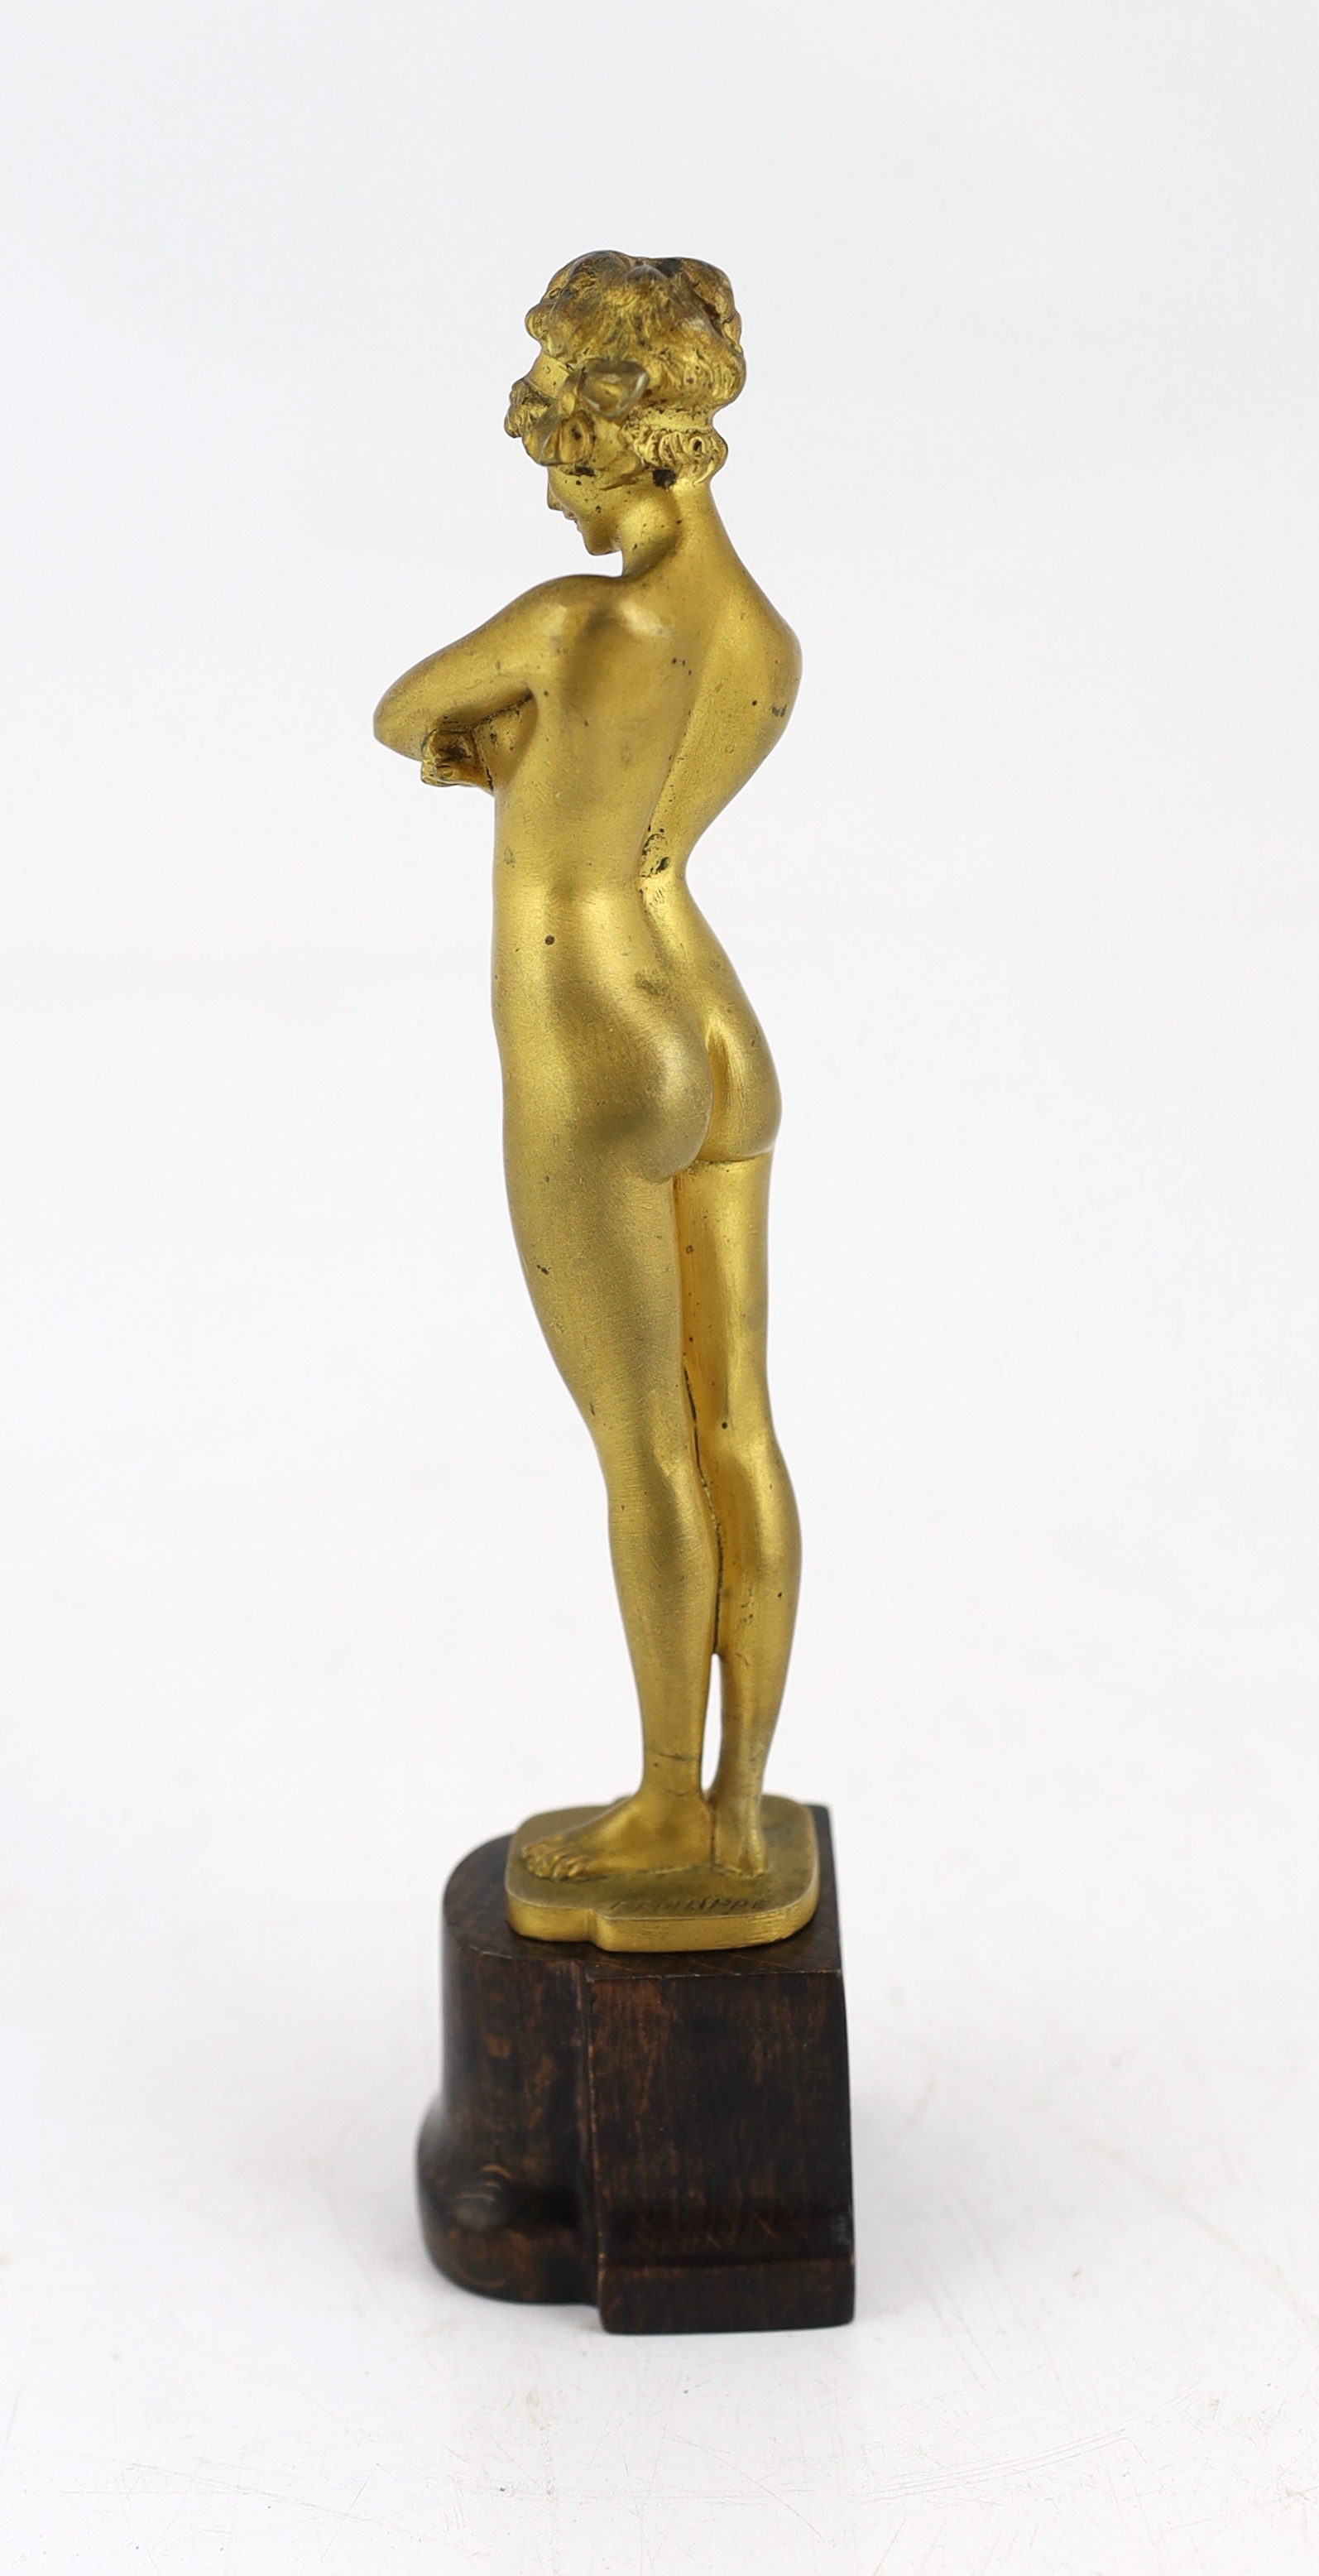 Paul Philippe (French, 1870-1930), a gilt bronze figure of a standing nude woman, 'The Challenge', 21.5cm high